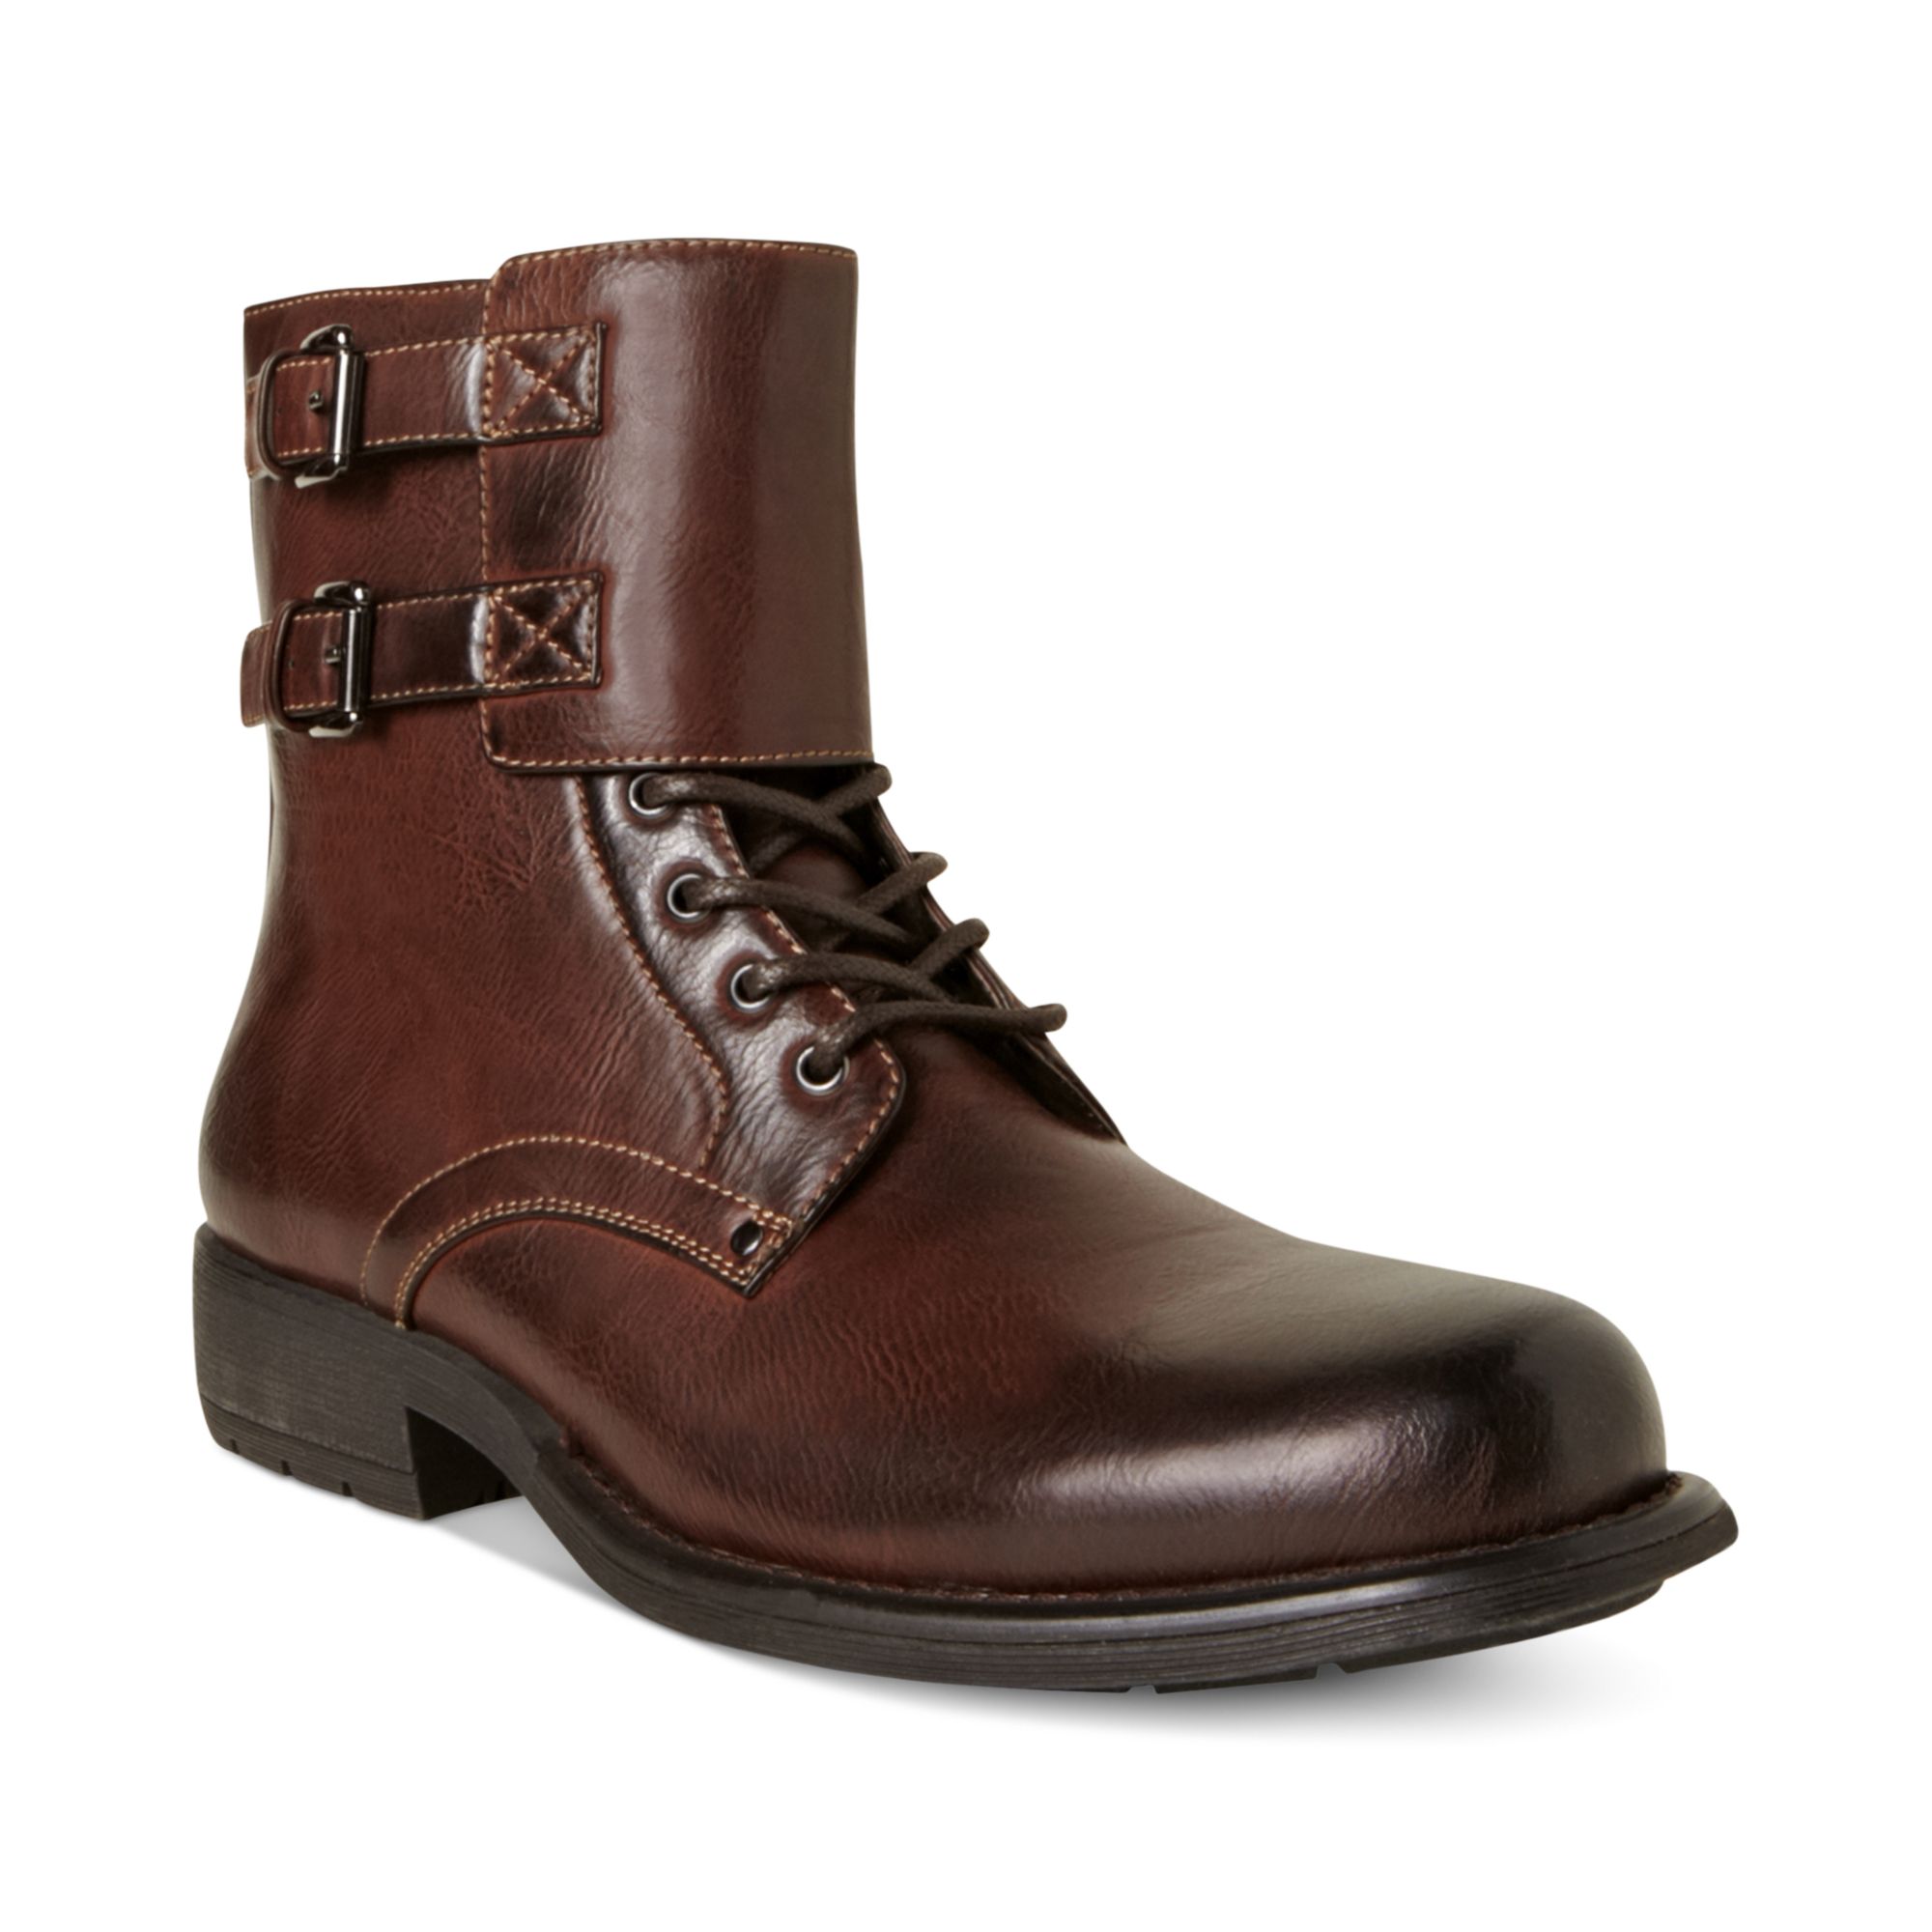 Steve Madden Pello Motorcycle Boots in Brown for Men Lyst